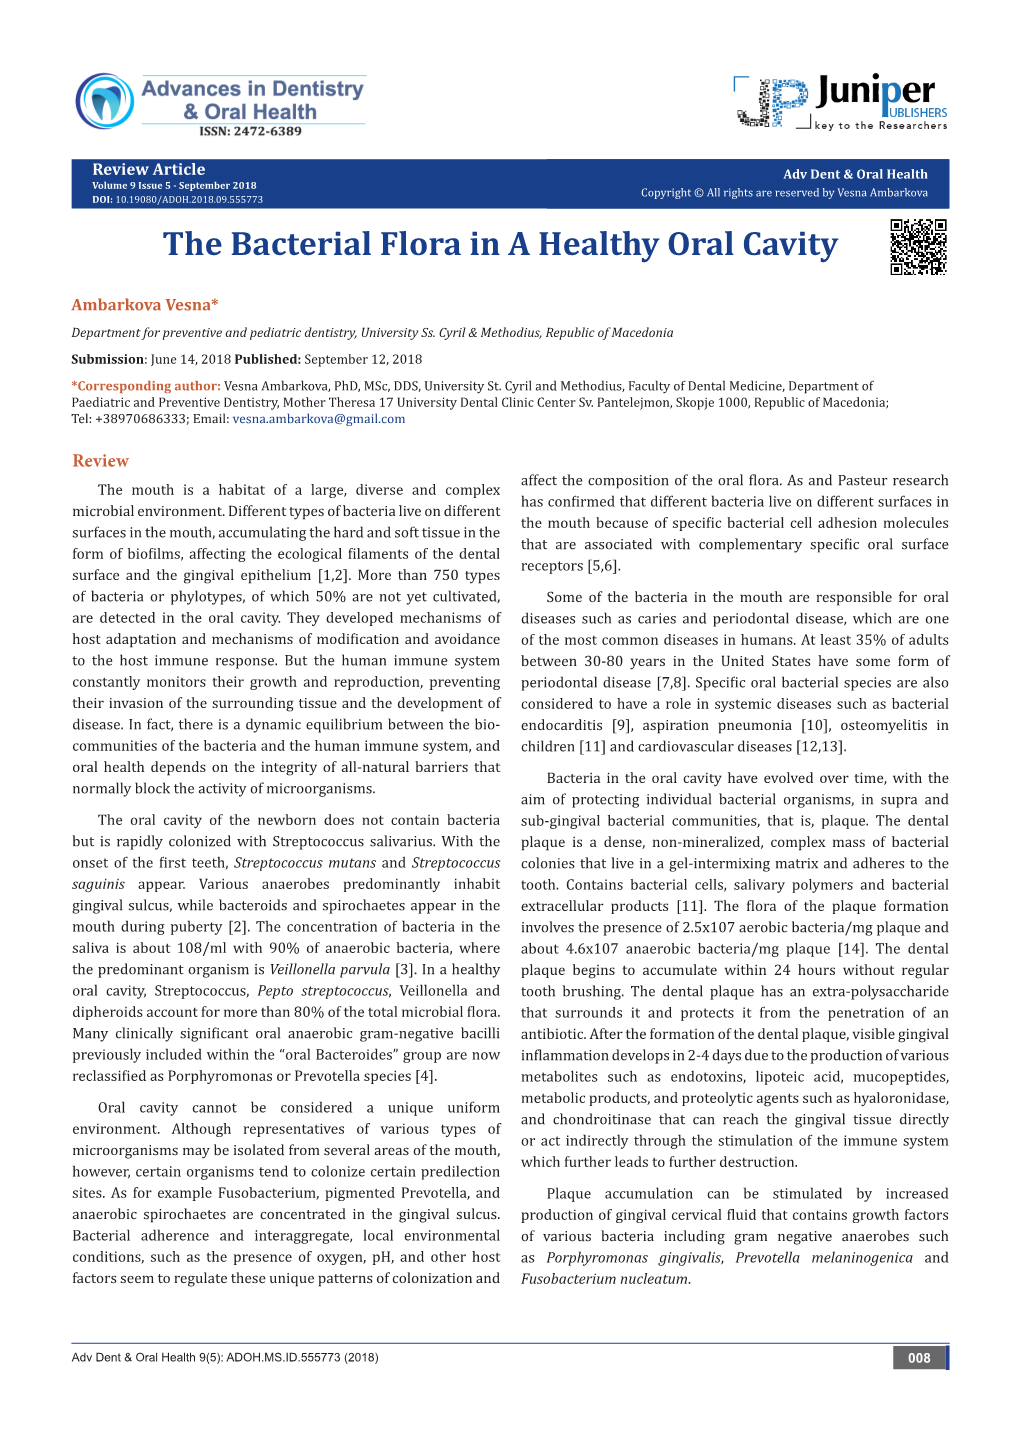 The Bacterial Flora in a Healthy Oral Cavity